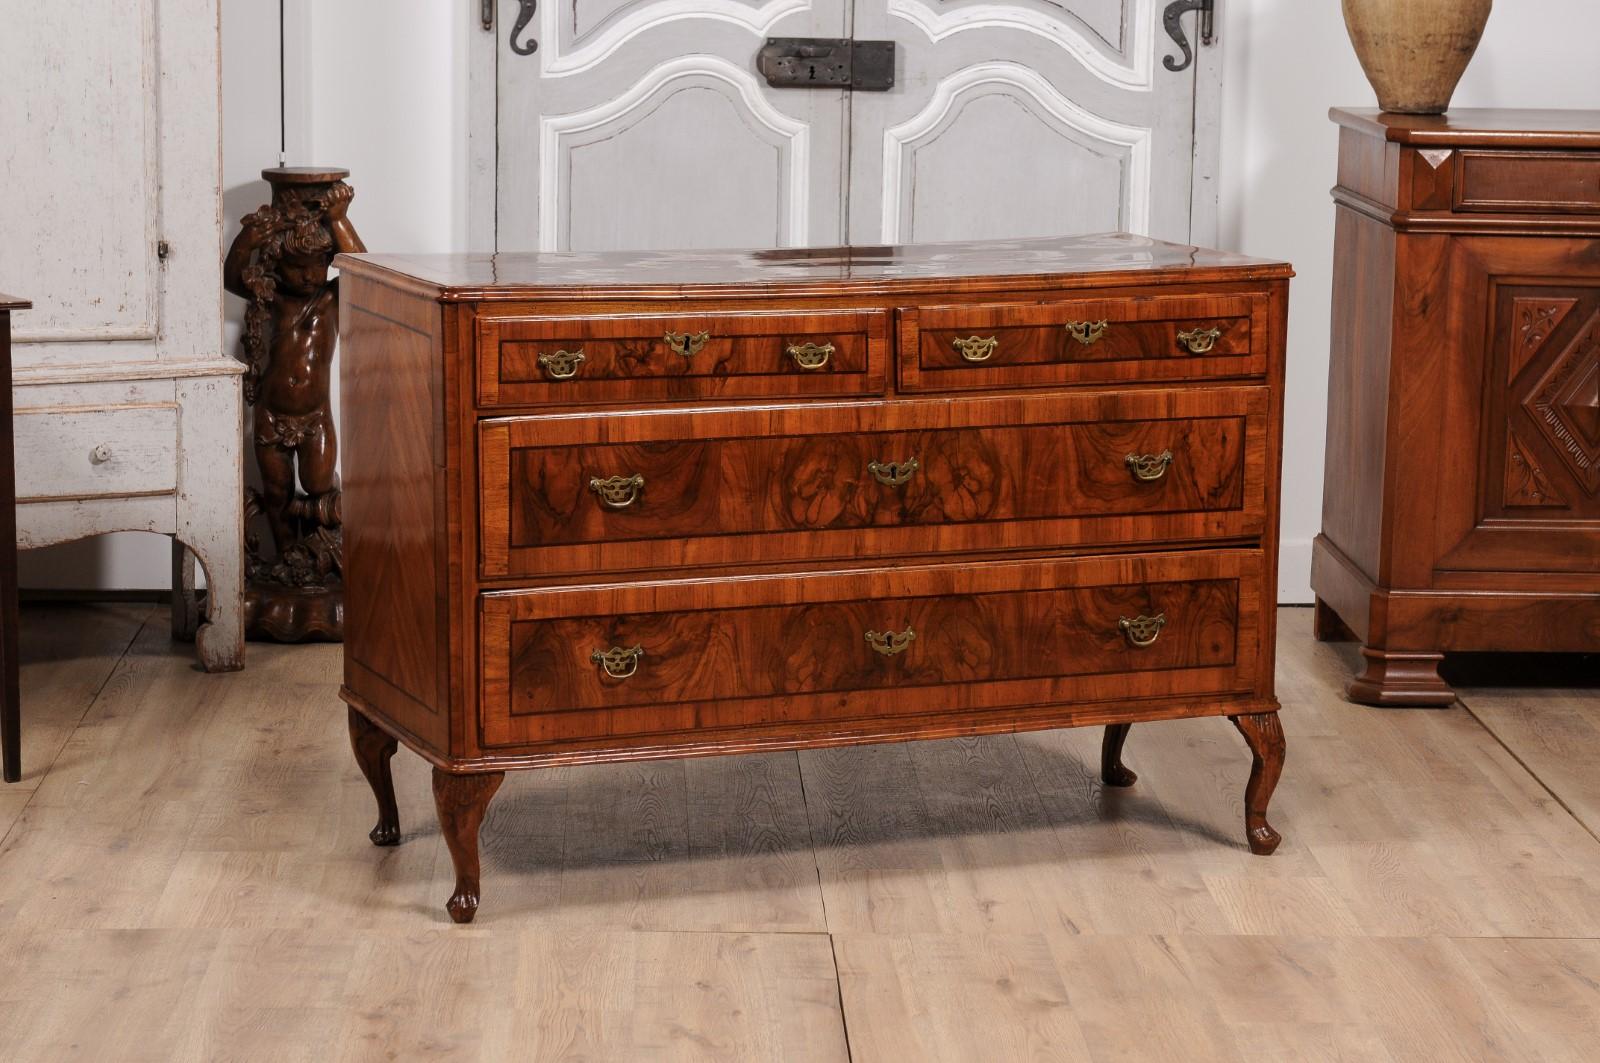 Italian 18th Century Venetian Walnut ad Mahogany Commode with Bookmatched Veneer For Sale